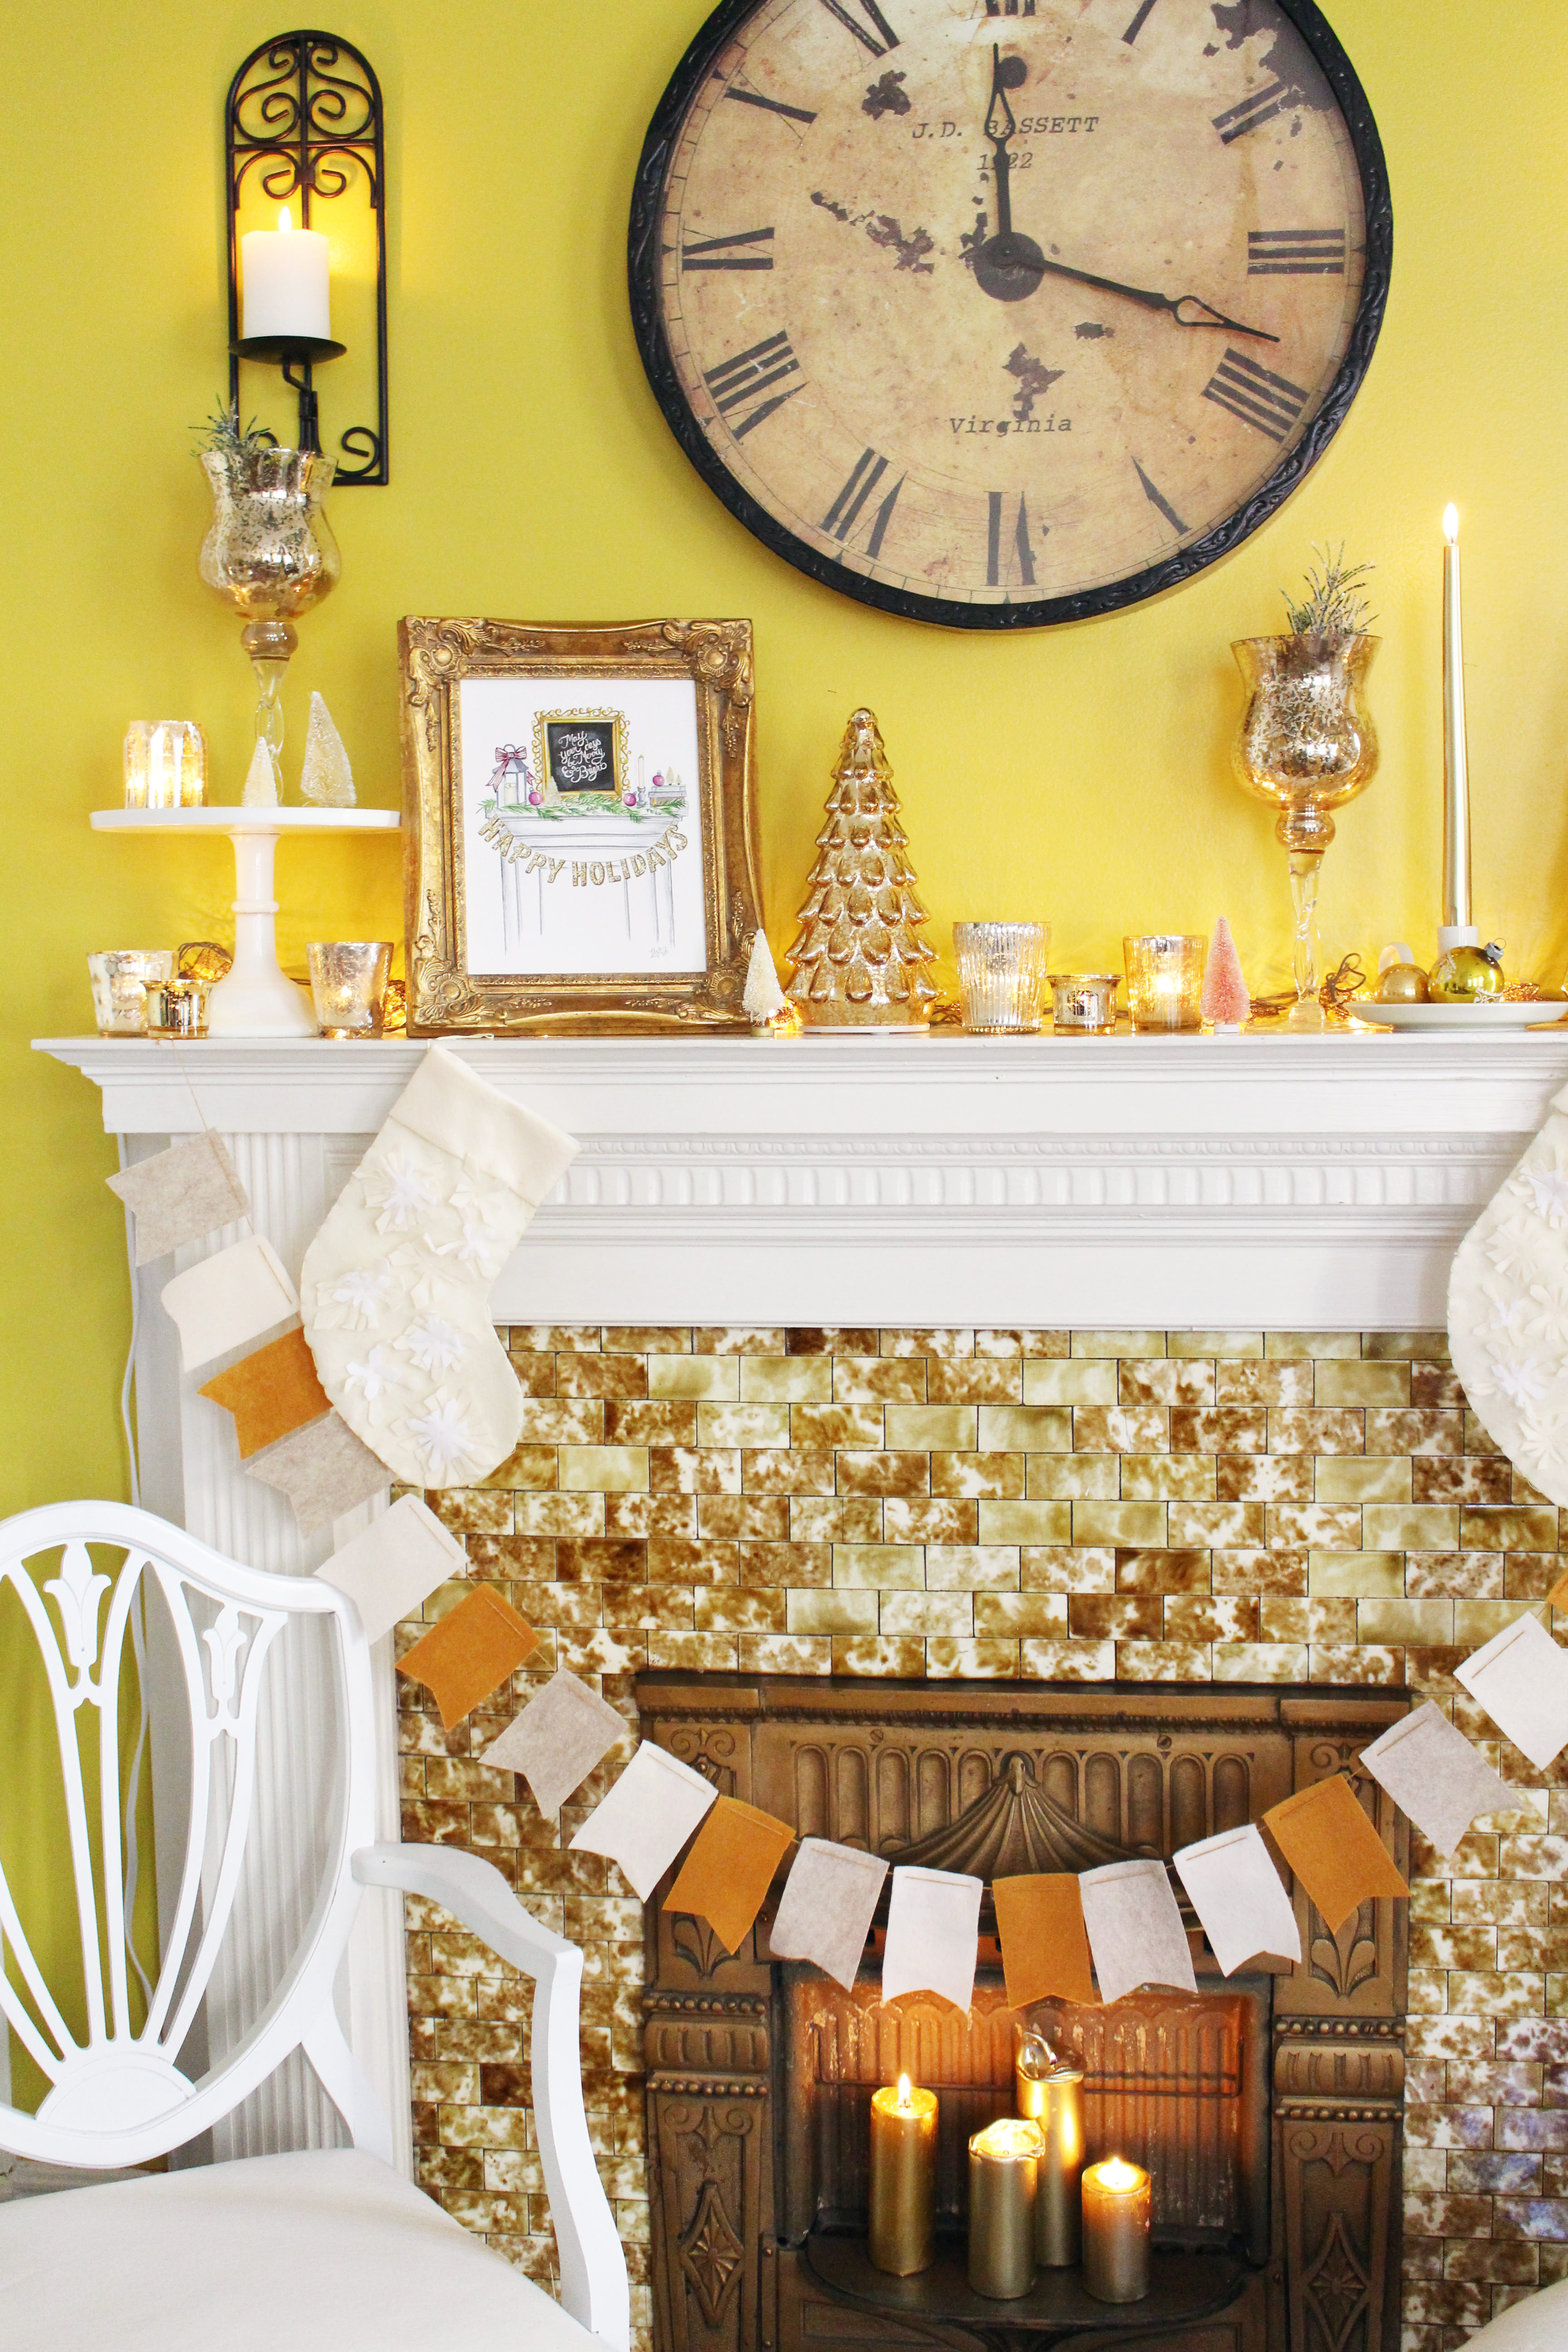 Holiday mantel styling tips from a professional stylist